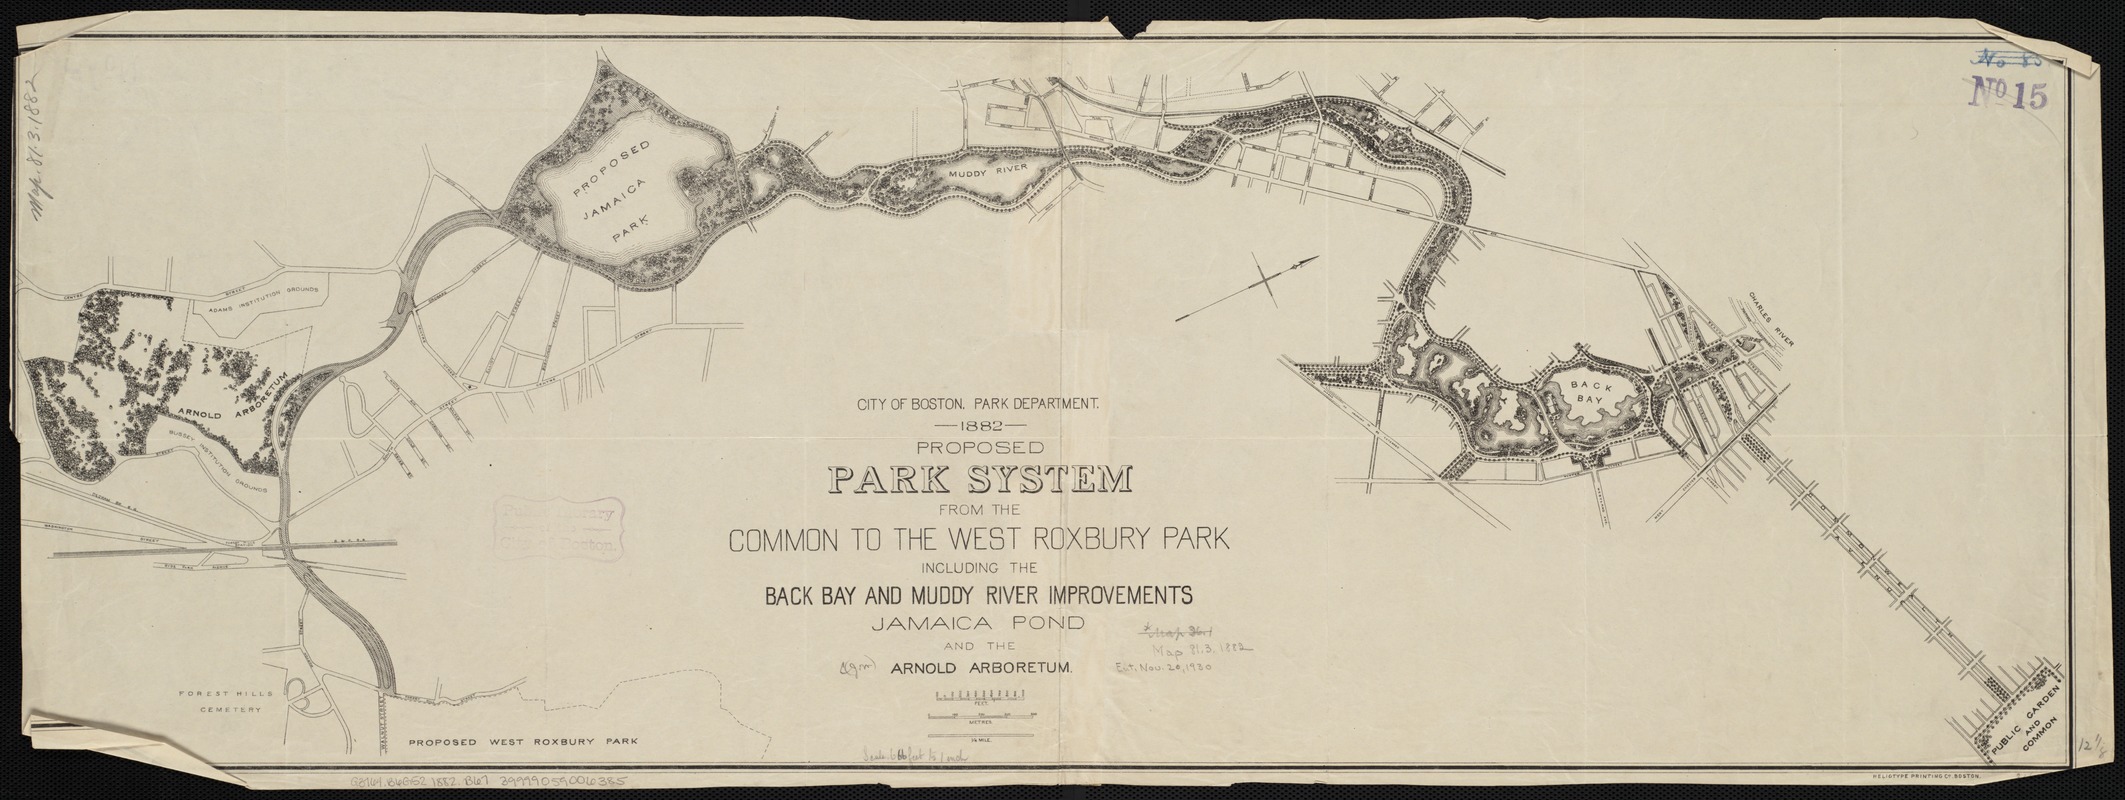 Proposed park system from the Common to the West Roxbury Park including the Back Bay and Muddy river improvements, Jamaica Pond and the Arnold Arboretum